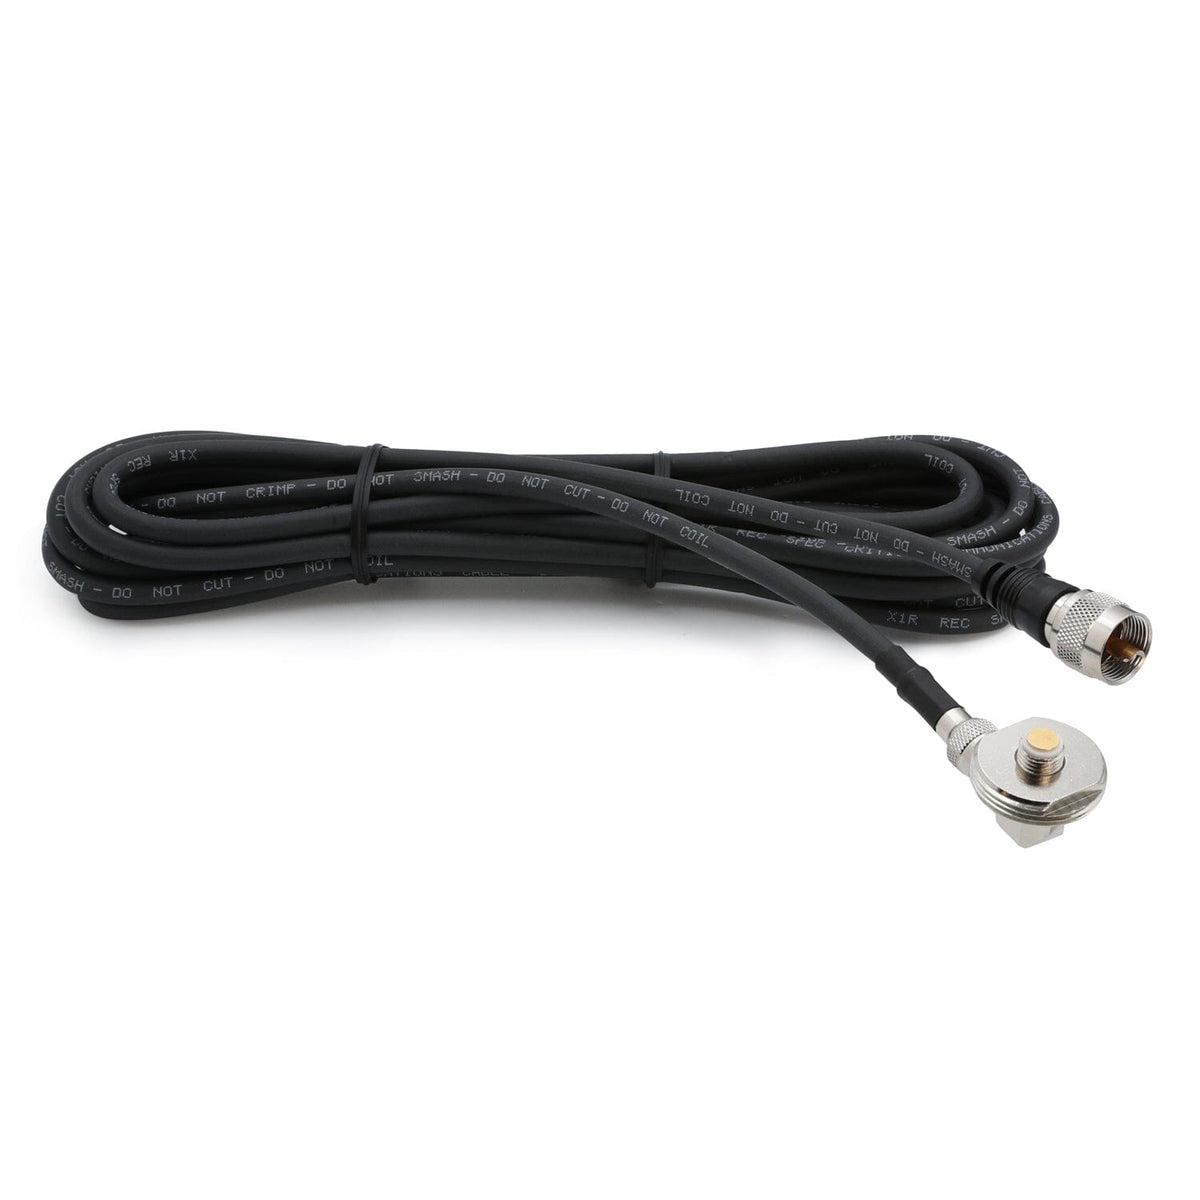 15' Antenna Coax Cable with 3/8 NMO Mount – Dirt King